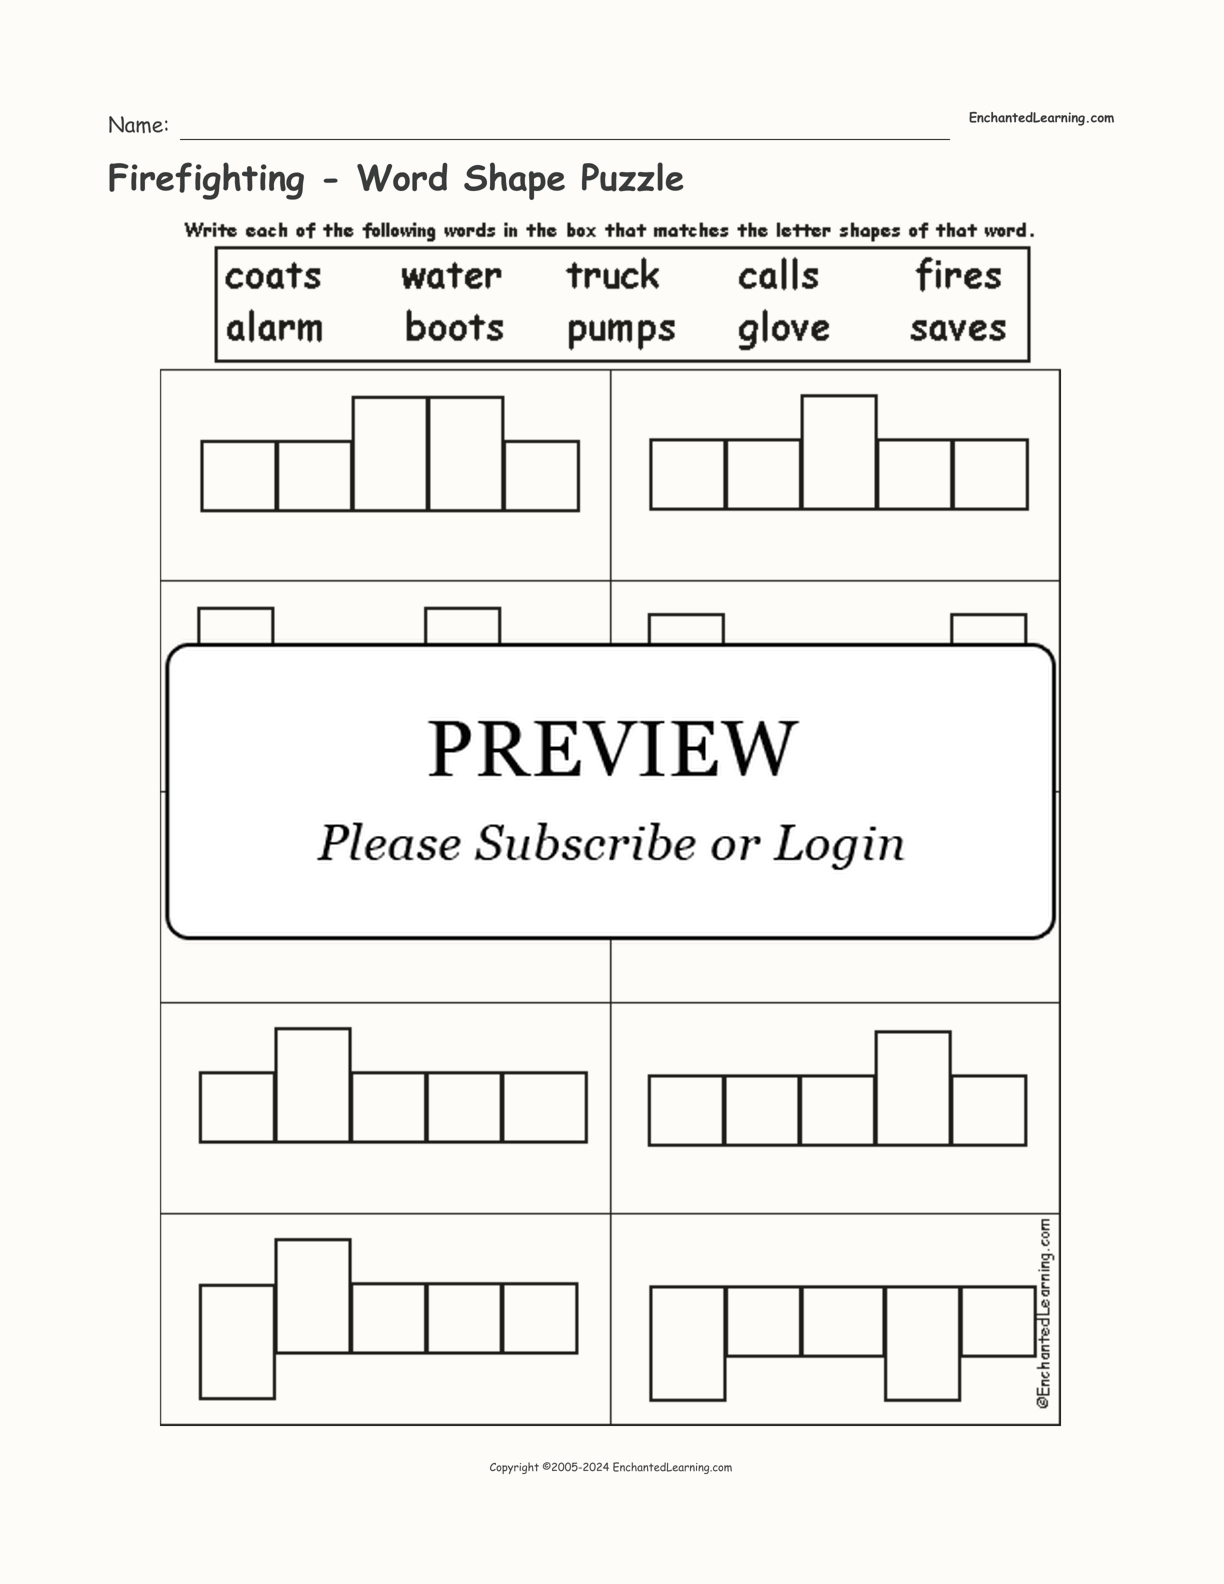 Firefighting - Word Shape Puzzle interactive worksheet page 1